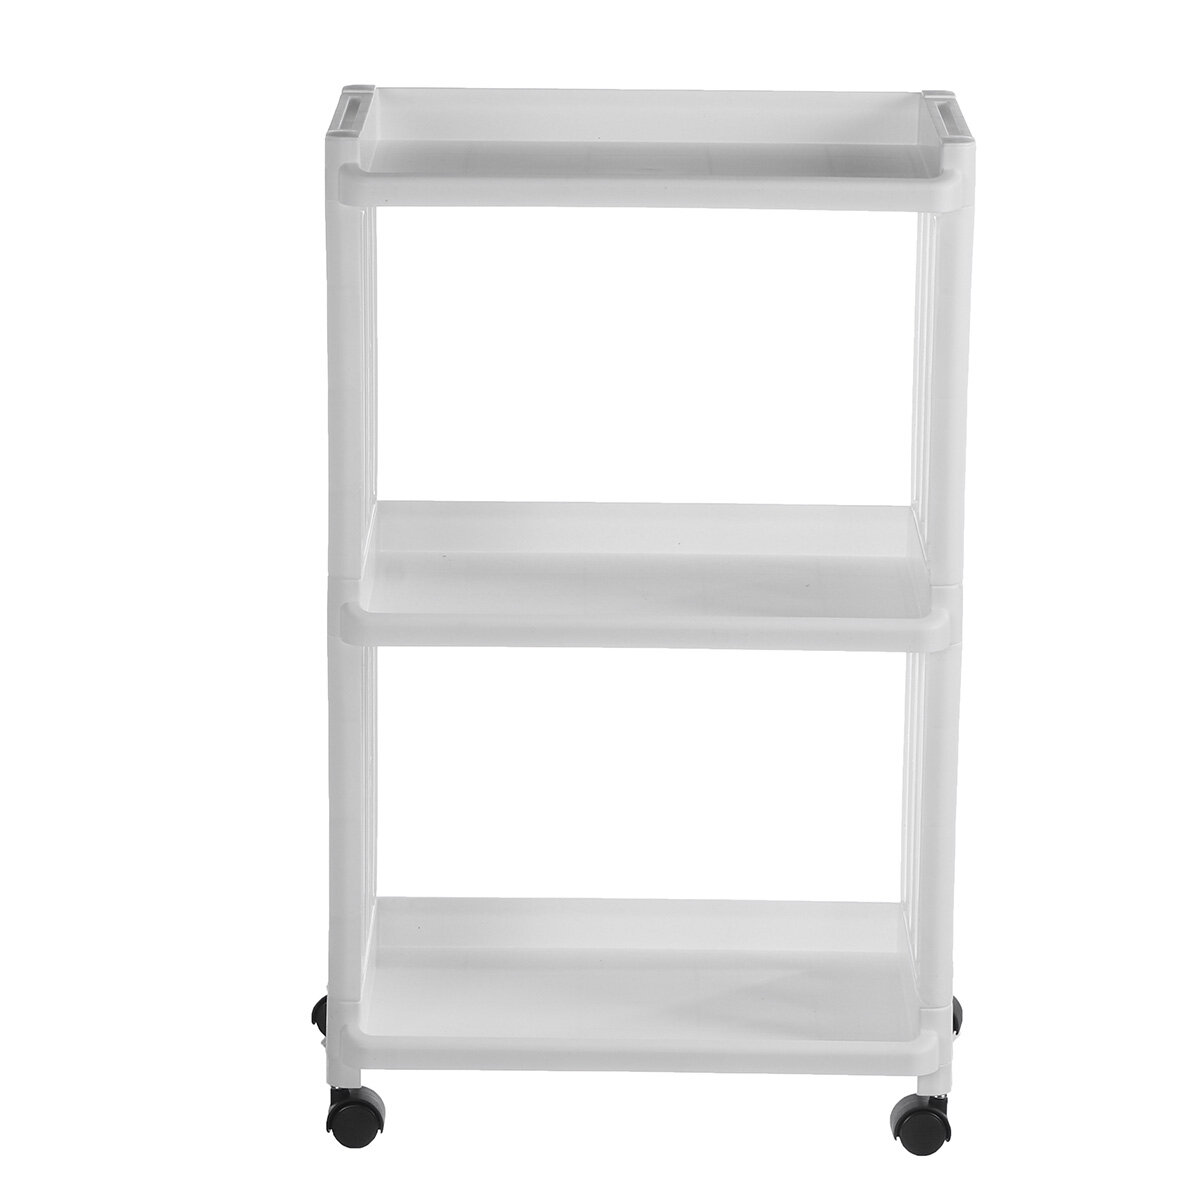 3/4 Tier Storage Cart Trolley Slide Out Rack Holder Home Kitchen Pull Out Shelf